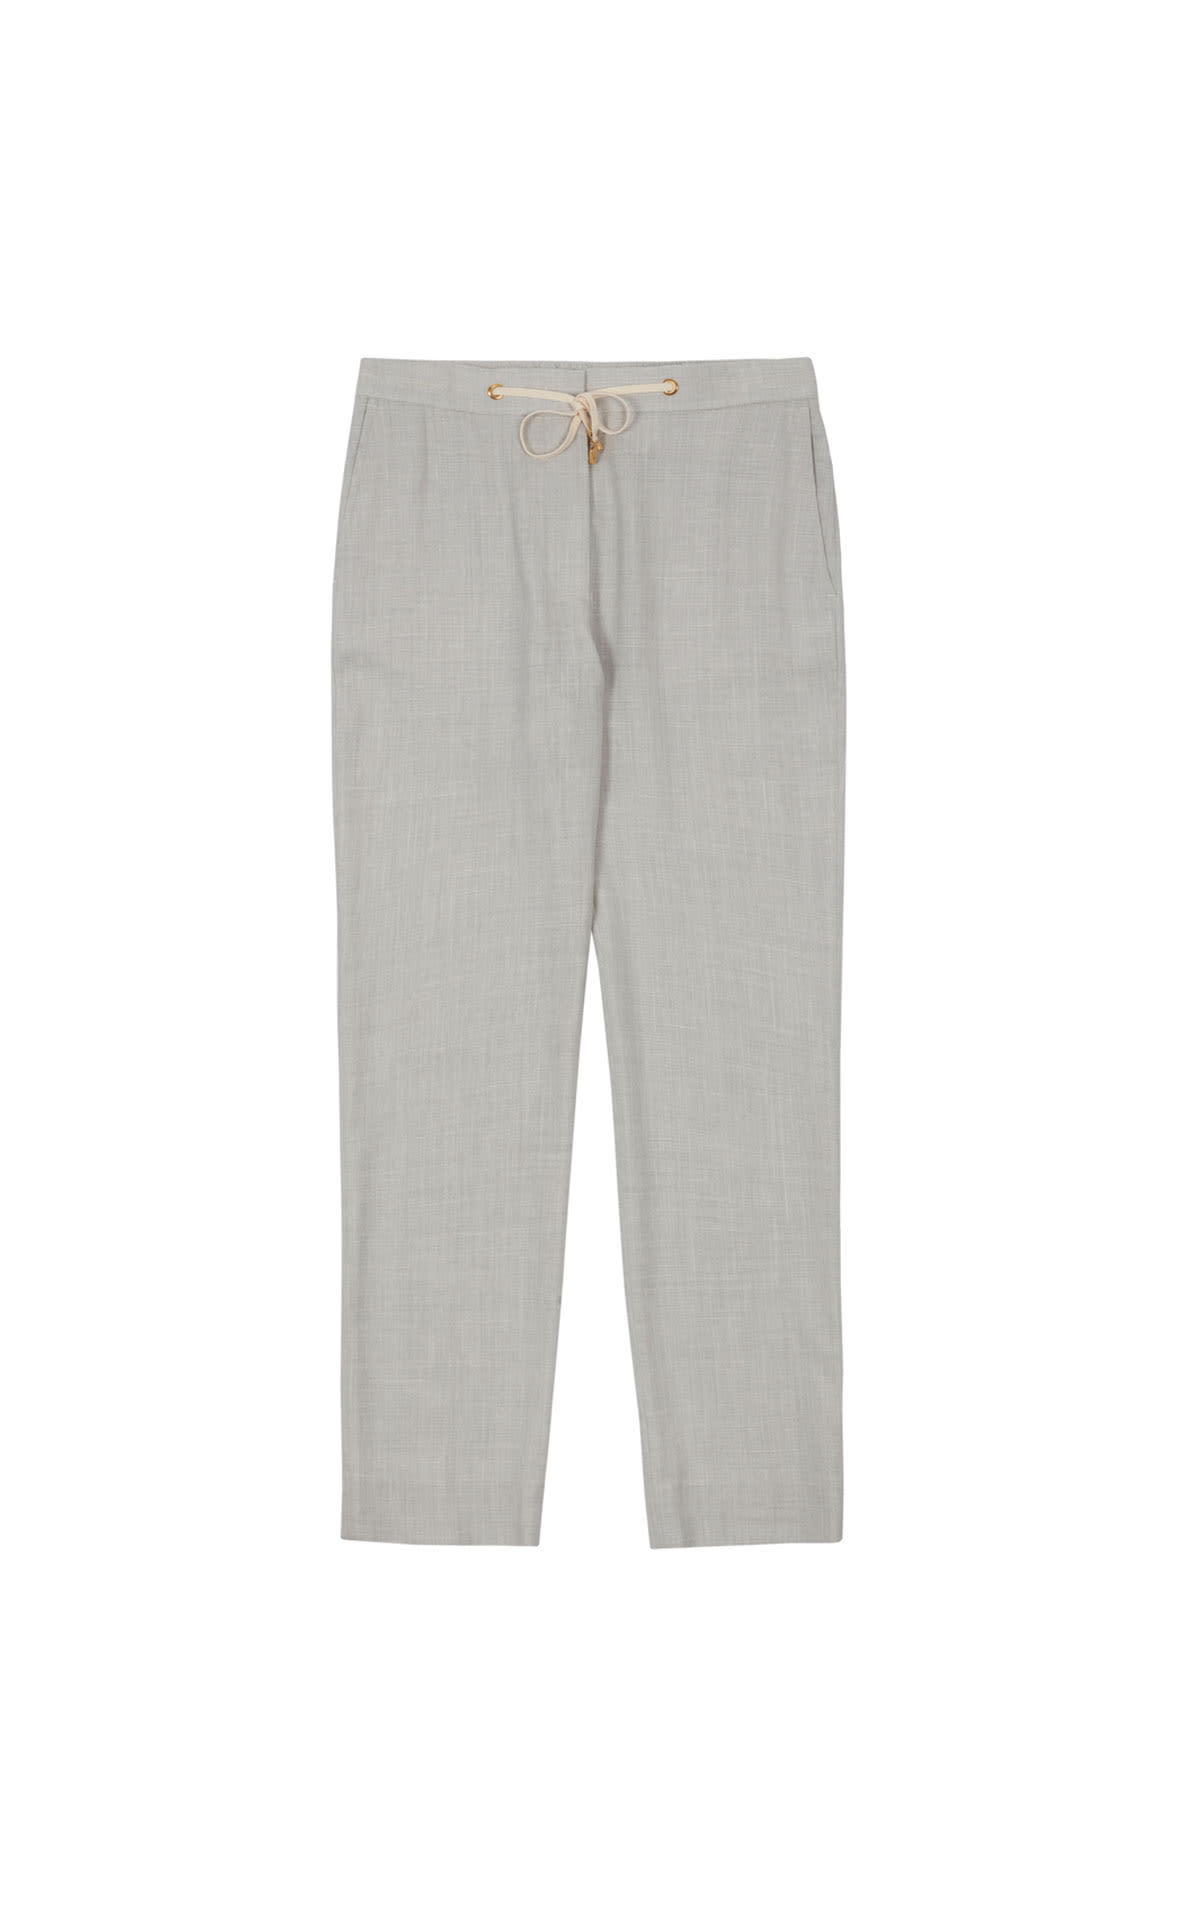 Eleventy Loro Piana fabric jogger pants from Bicester Village